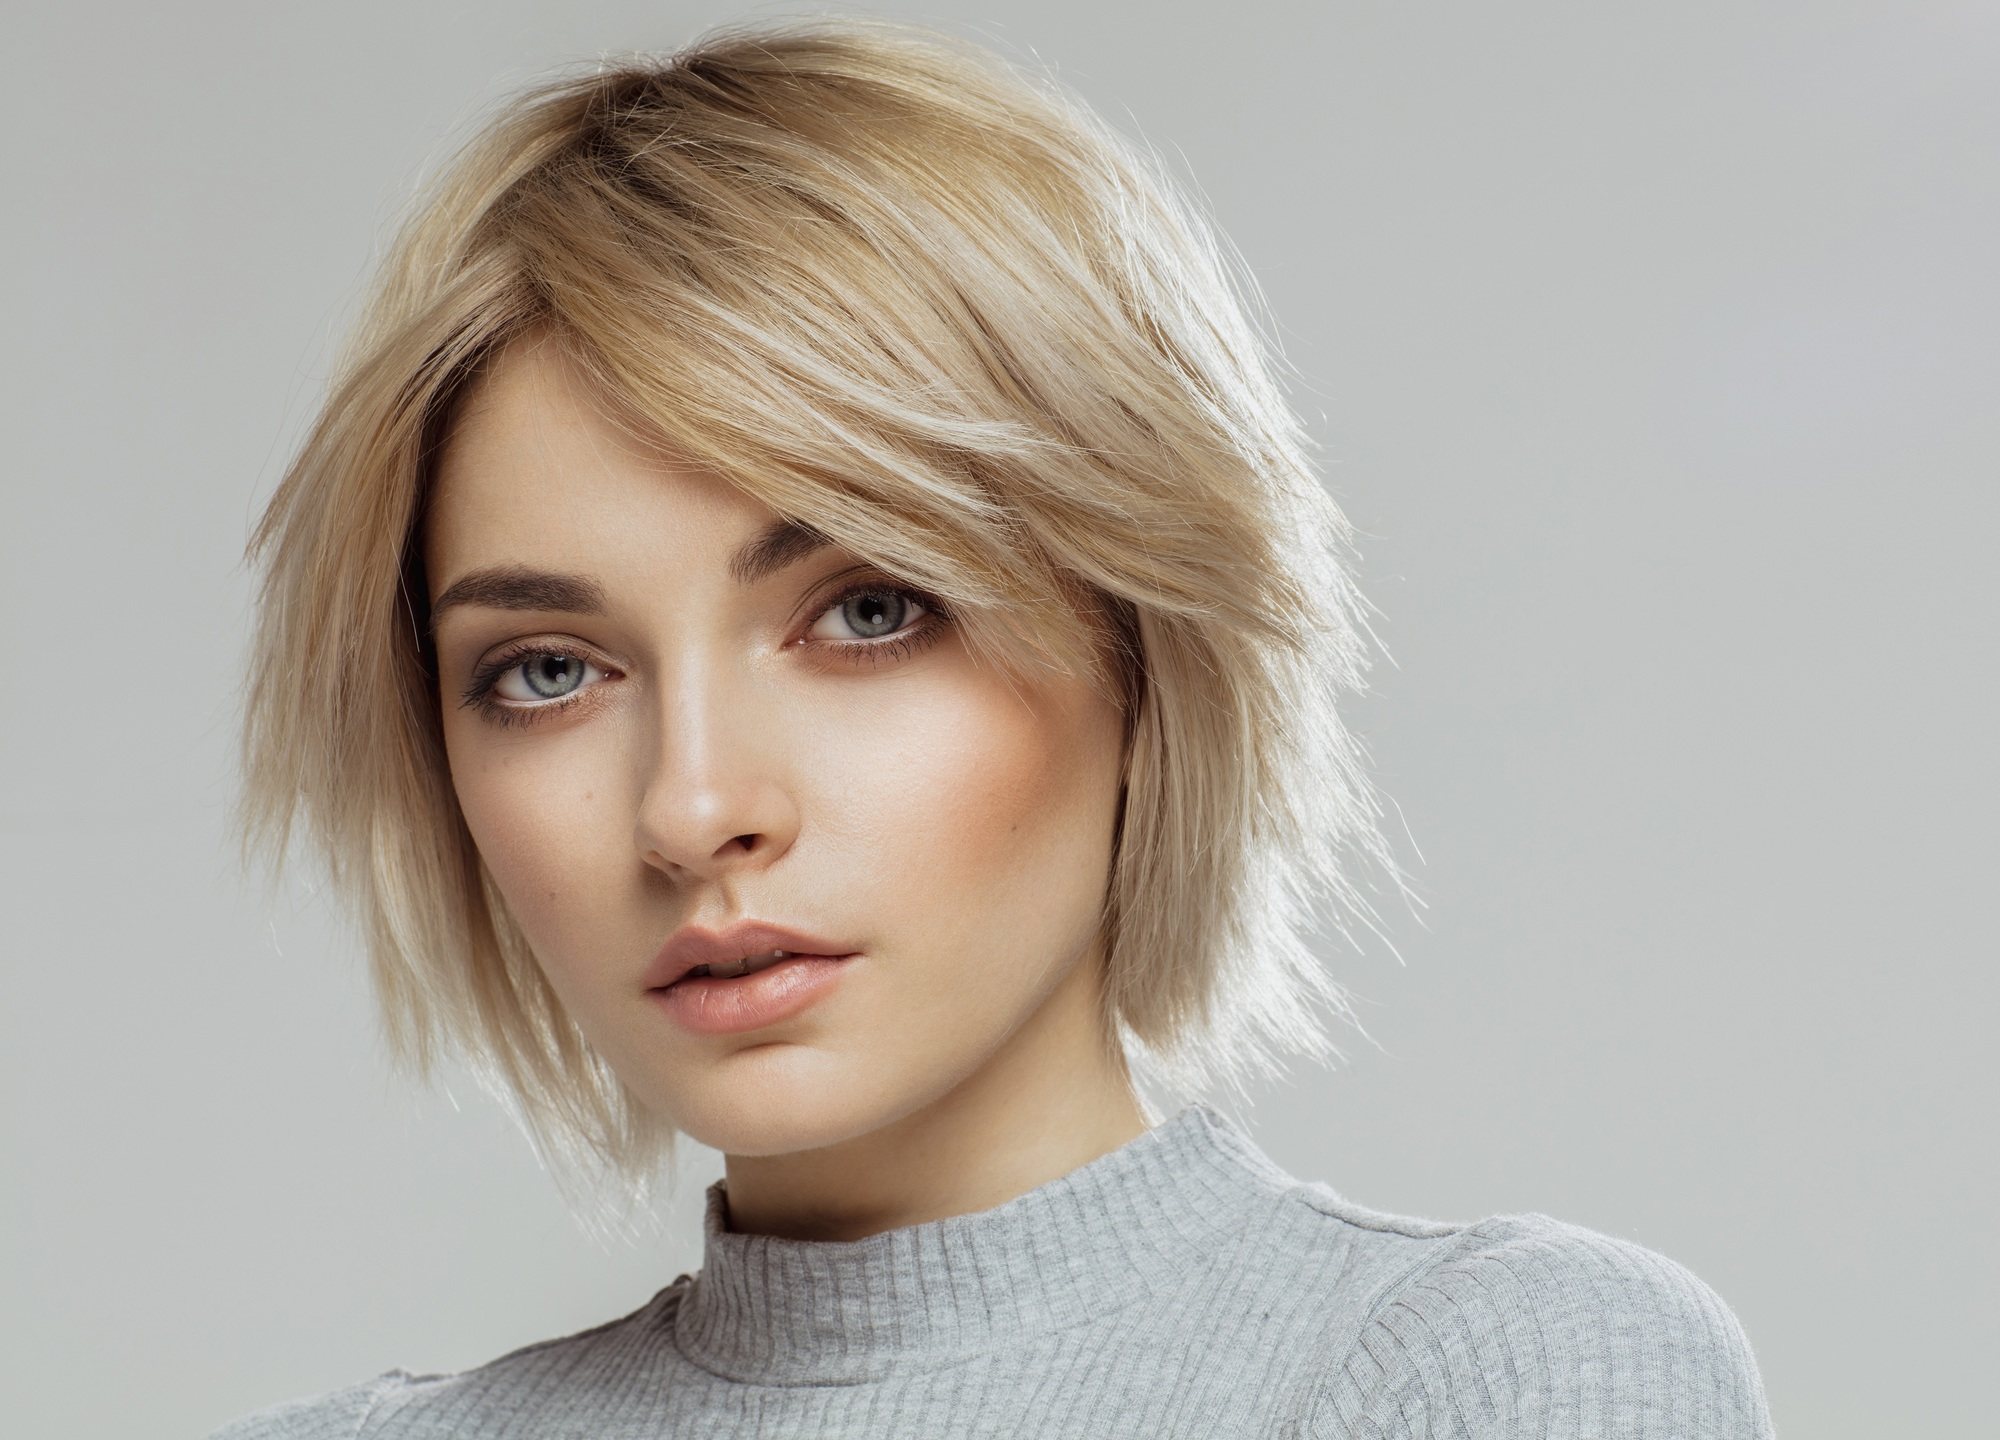 Haircuts for rainy season: Closeup shot of a woman with short layered blonde hair wearing a gray top against a gray background